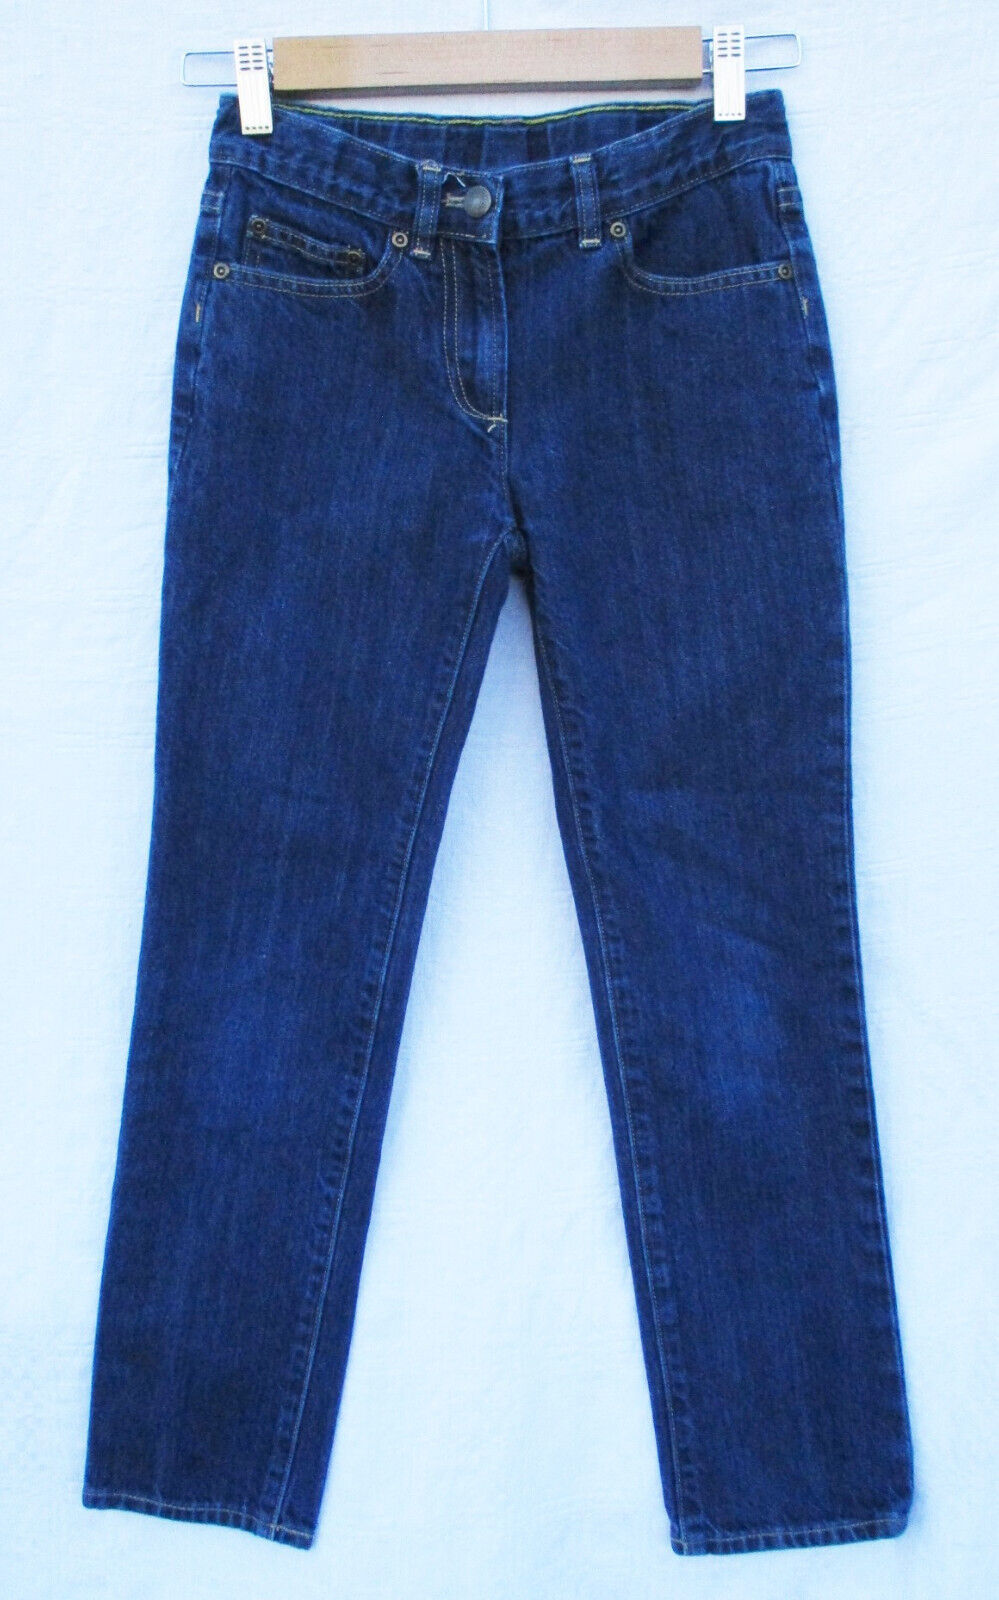 Crewcuts J.Crew Blue Jeans Girls Size 10 Button and Adjustable Waist J. Crew - $15.20